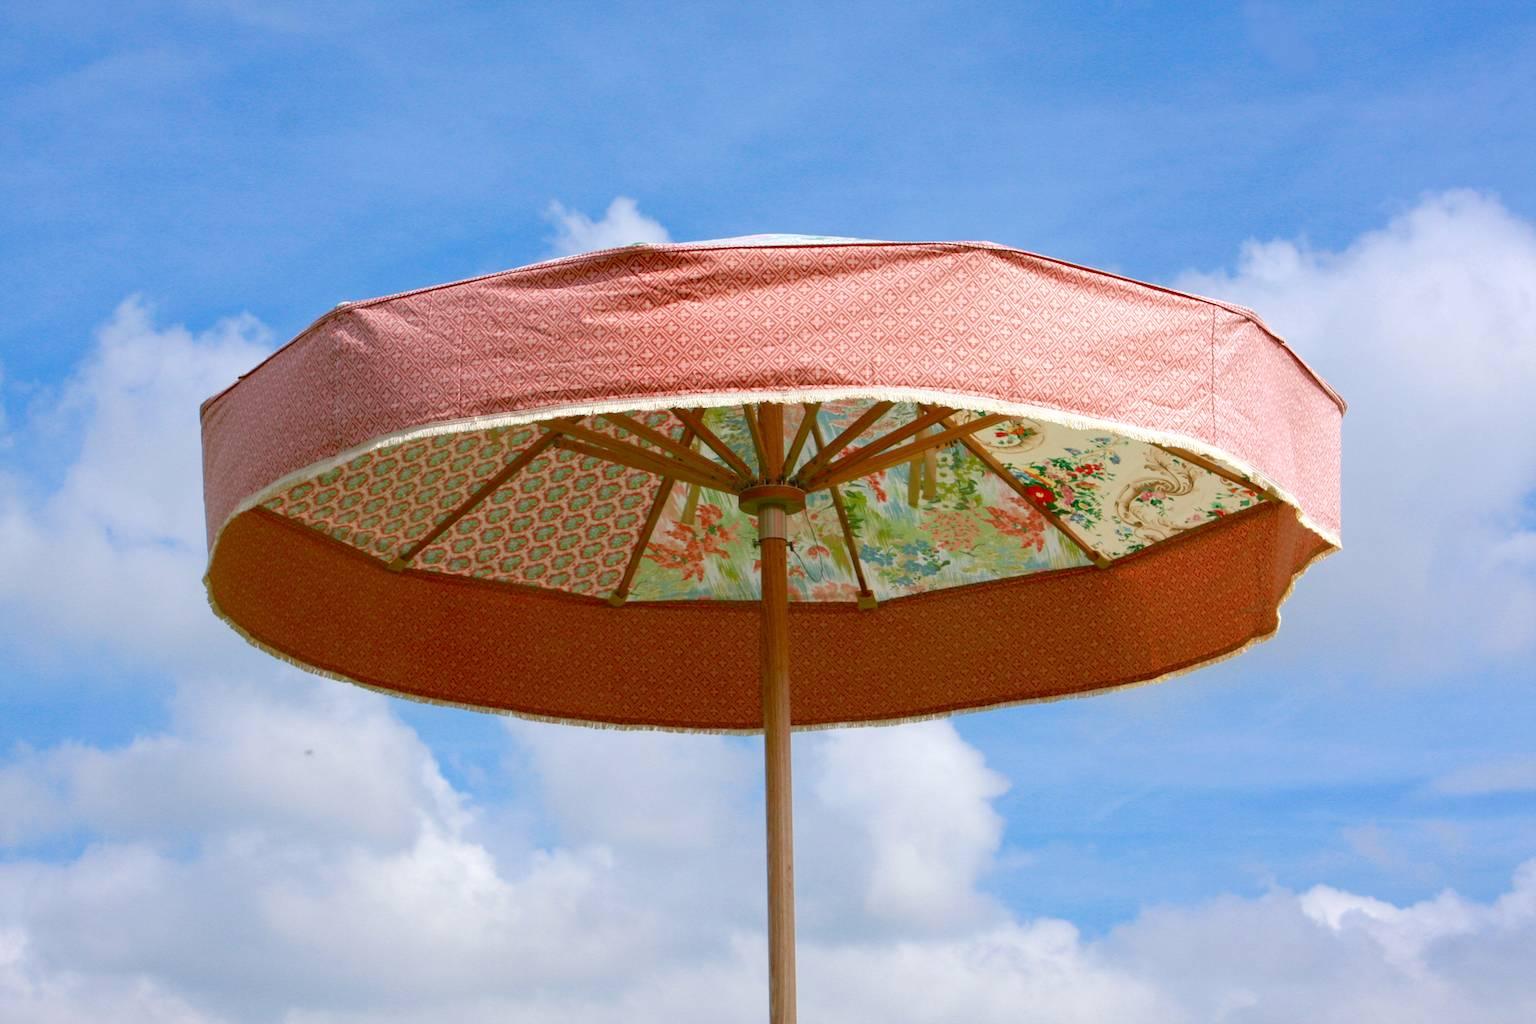 Sunbeam Jackie's iconic contemporary parasols are unique one-off pieces, each parasol is made using it's own selection of heritage textiles. Displayed on Sunbeam Jackie's specially-crafted ash parasol frame, these parasols are objects of